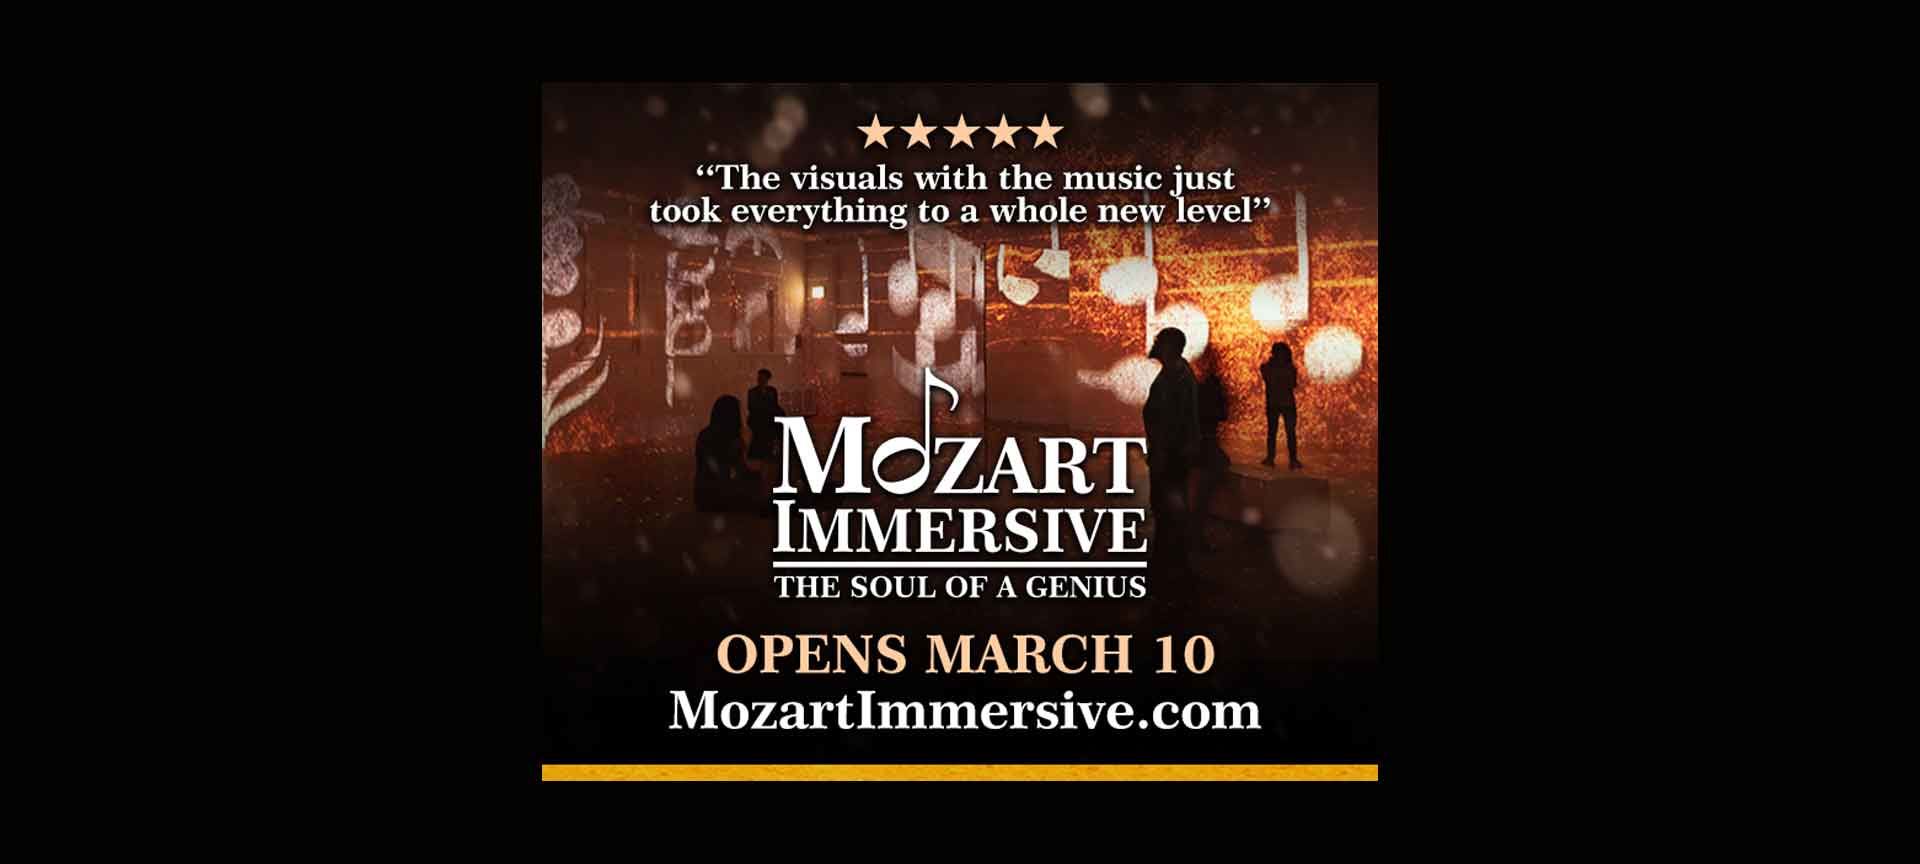 Mozart Immersive The Soul of a Genius Opens March 10